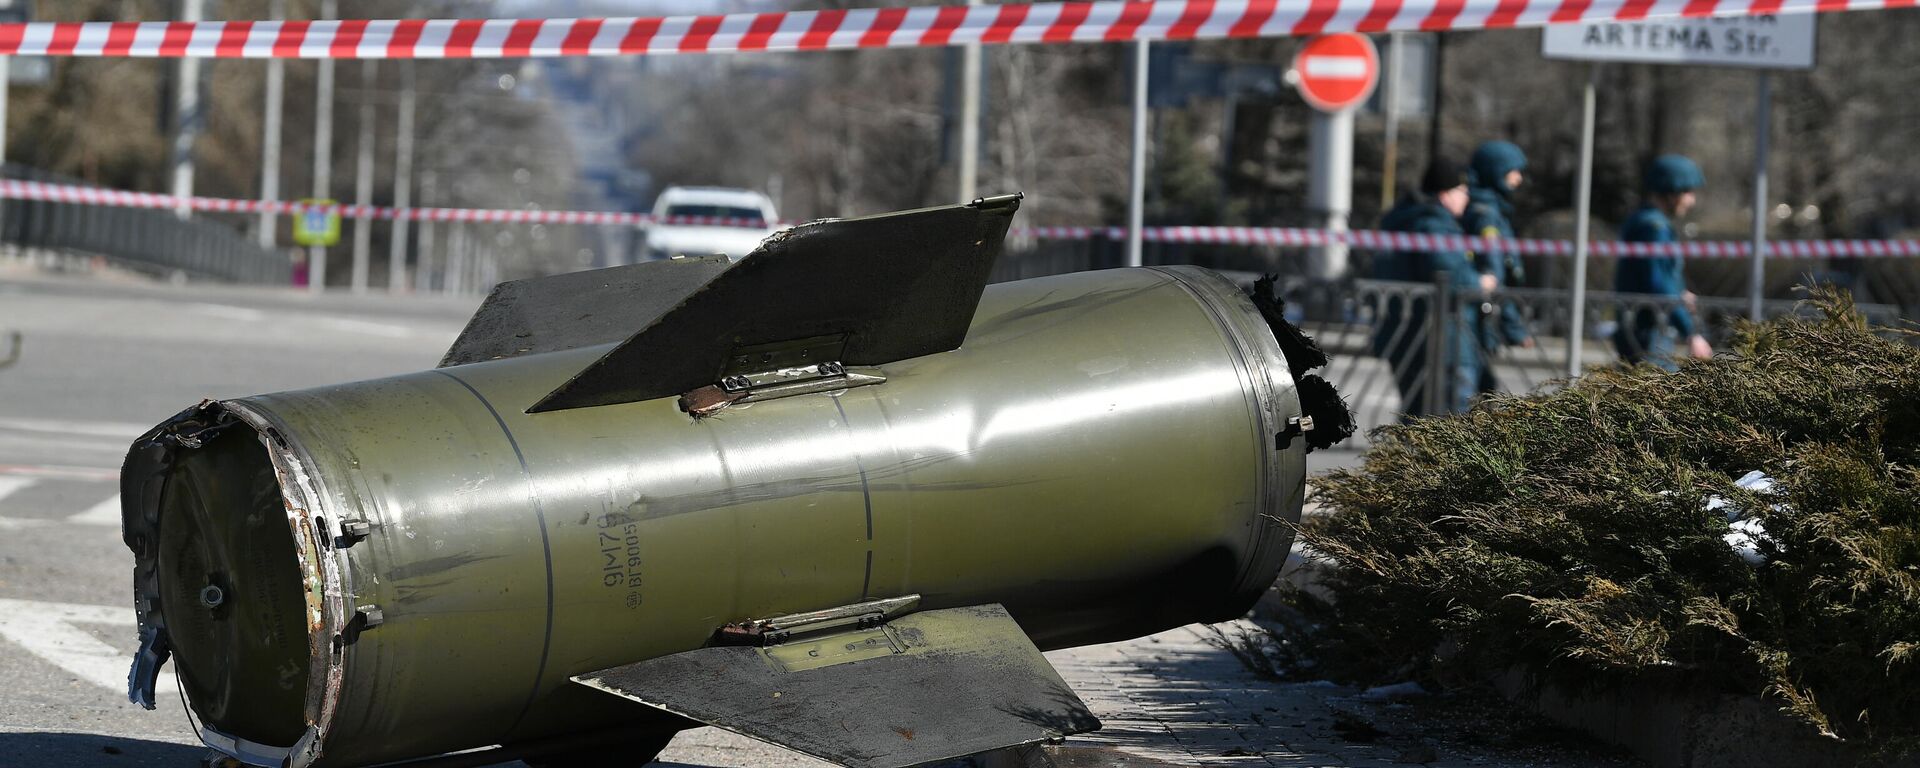 A fragment of an Ukrainian Tochka-U missile which had been shot down near the Government House in the city center during a recent shelling is pictured in Donetsk, Donetsk People's Republic. - Sputnik International, 1920, 08.04.2022